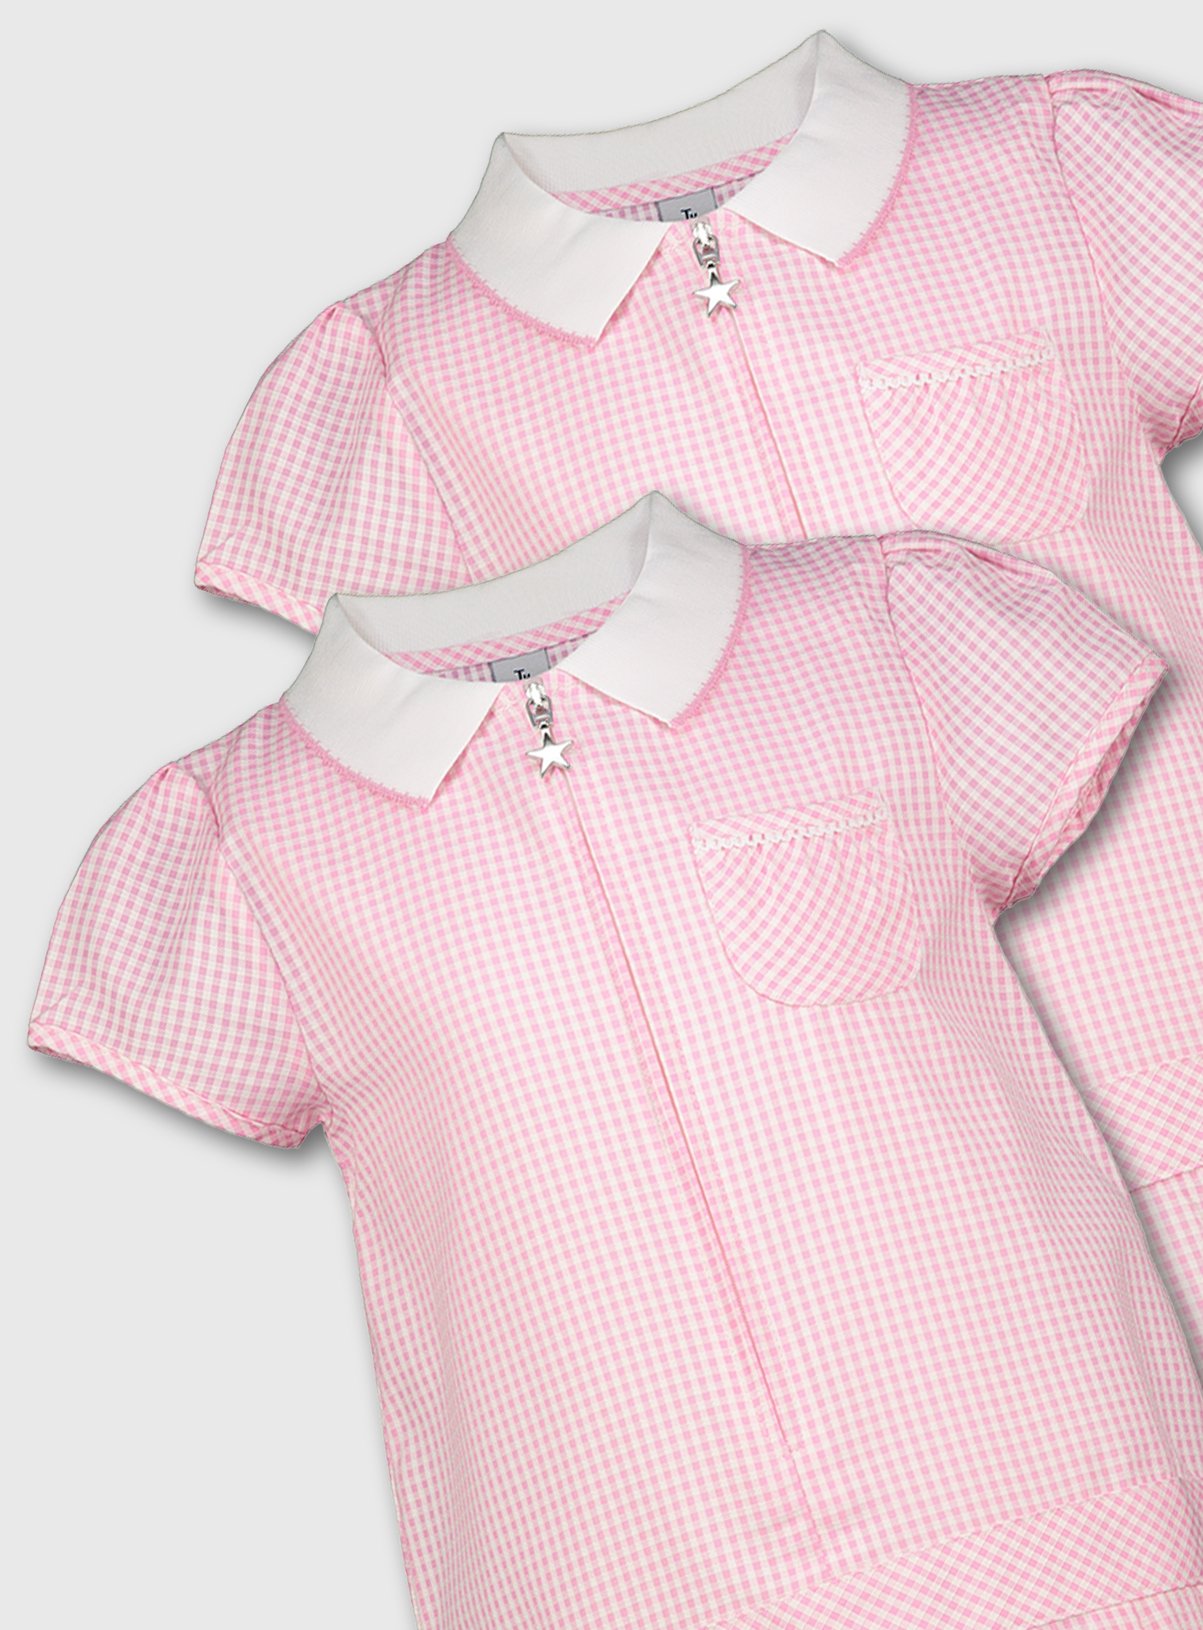 Pink Gingham Sporty Dresses 2 Pack Review